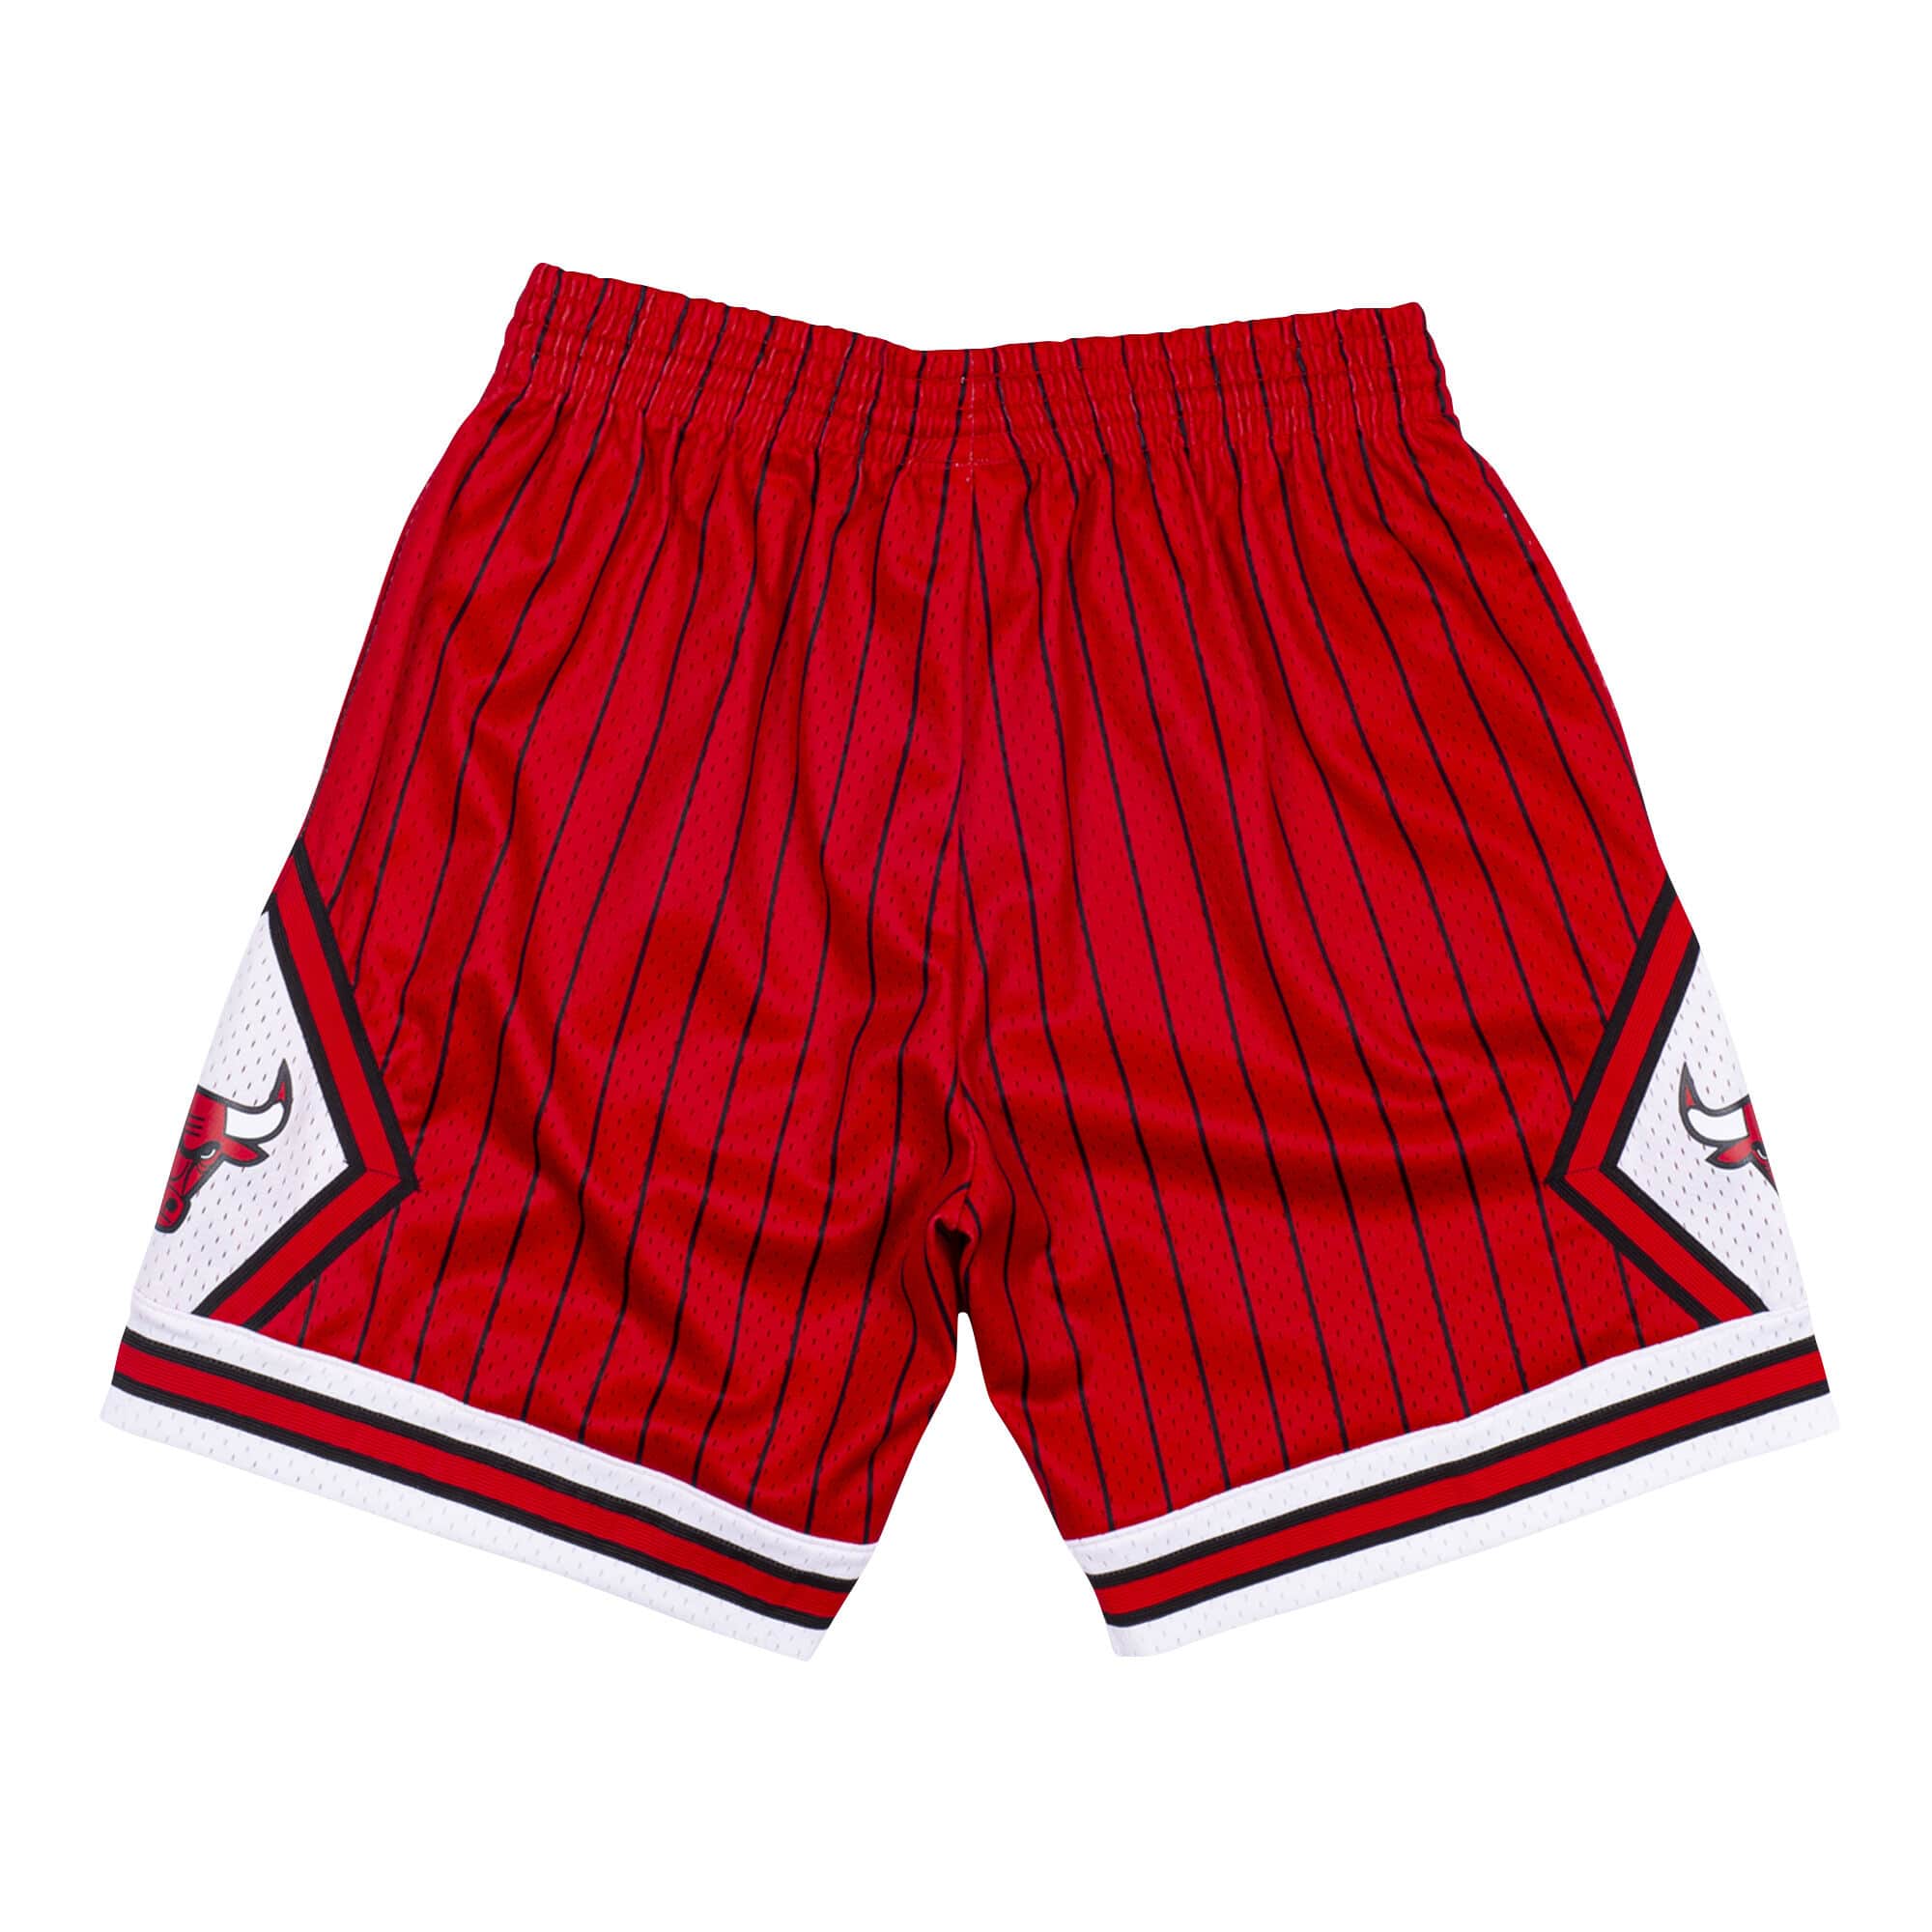 Mitchell & Ness Memphis Grizzlies Red/Teal Hardwood Classic Shorts Size  M Medium